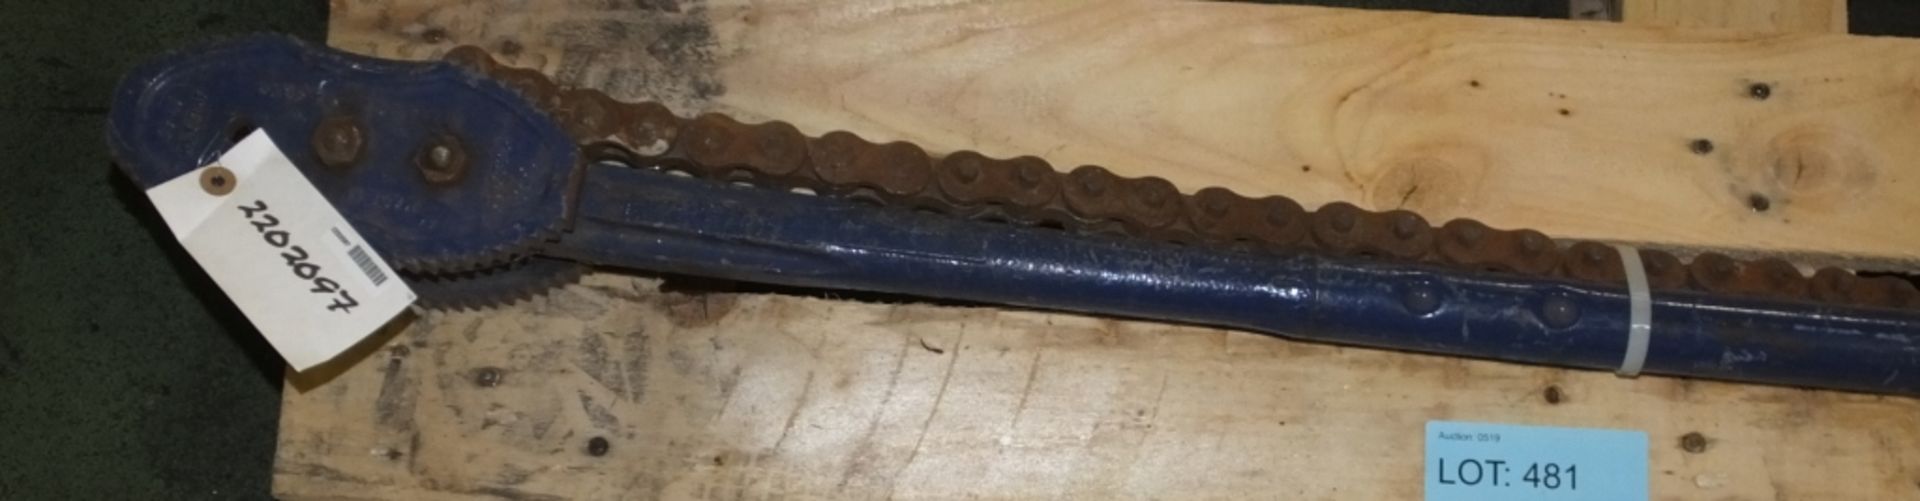 Record Heavy Duty Pipe Wrench - Image 2 of 2